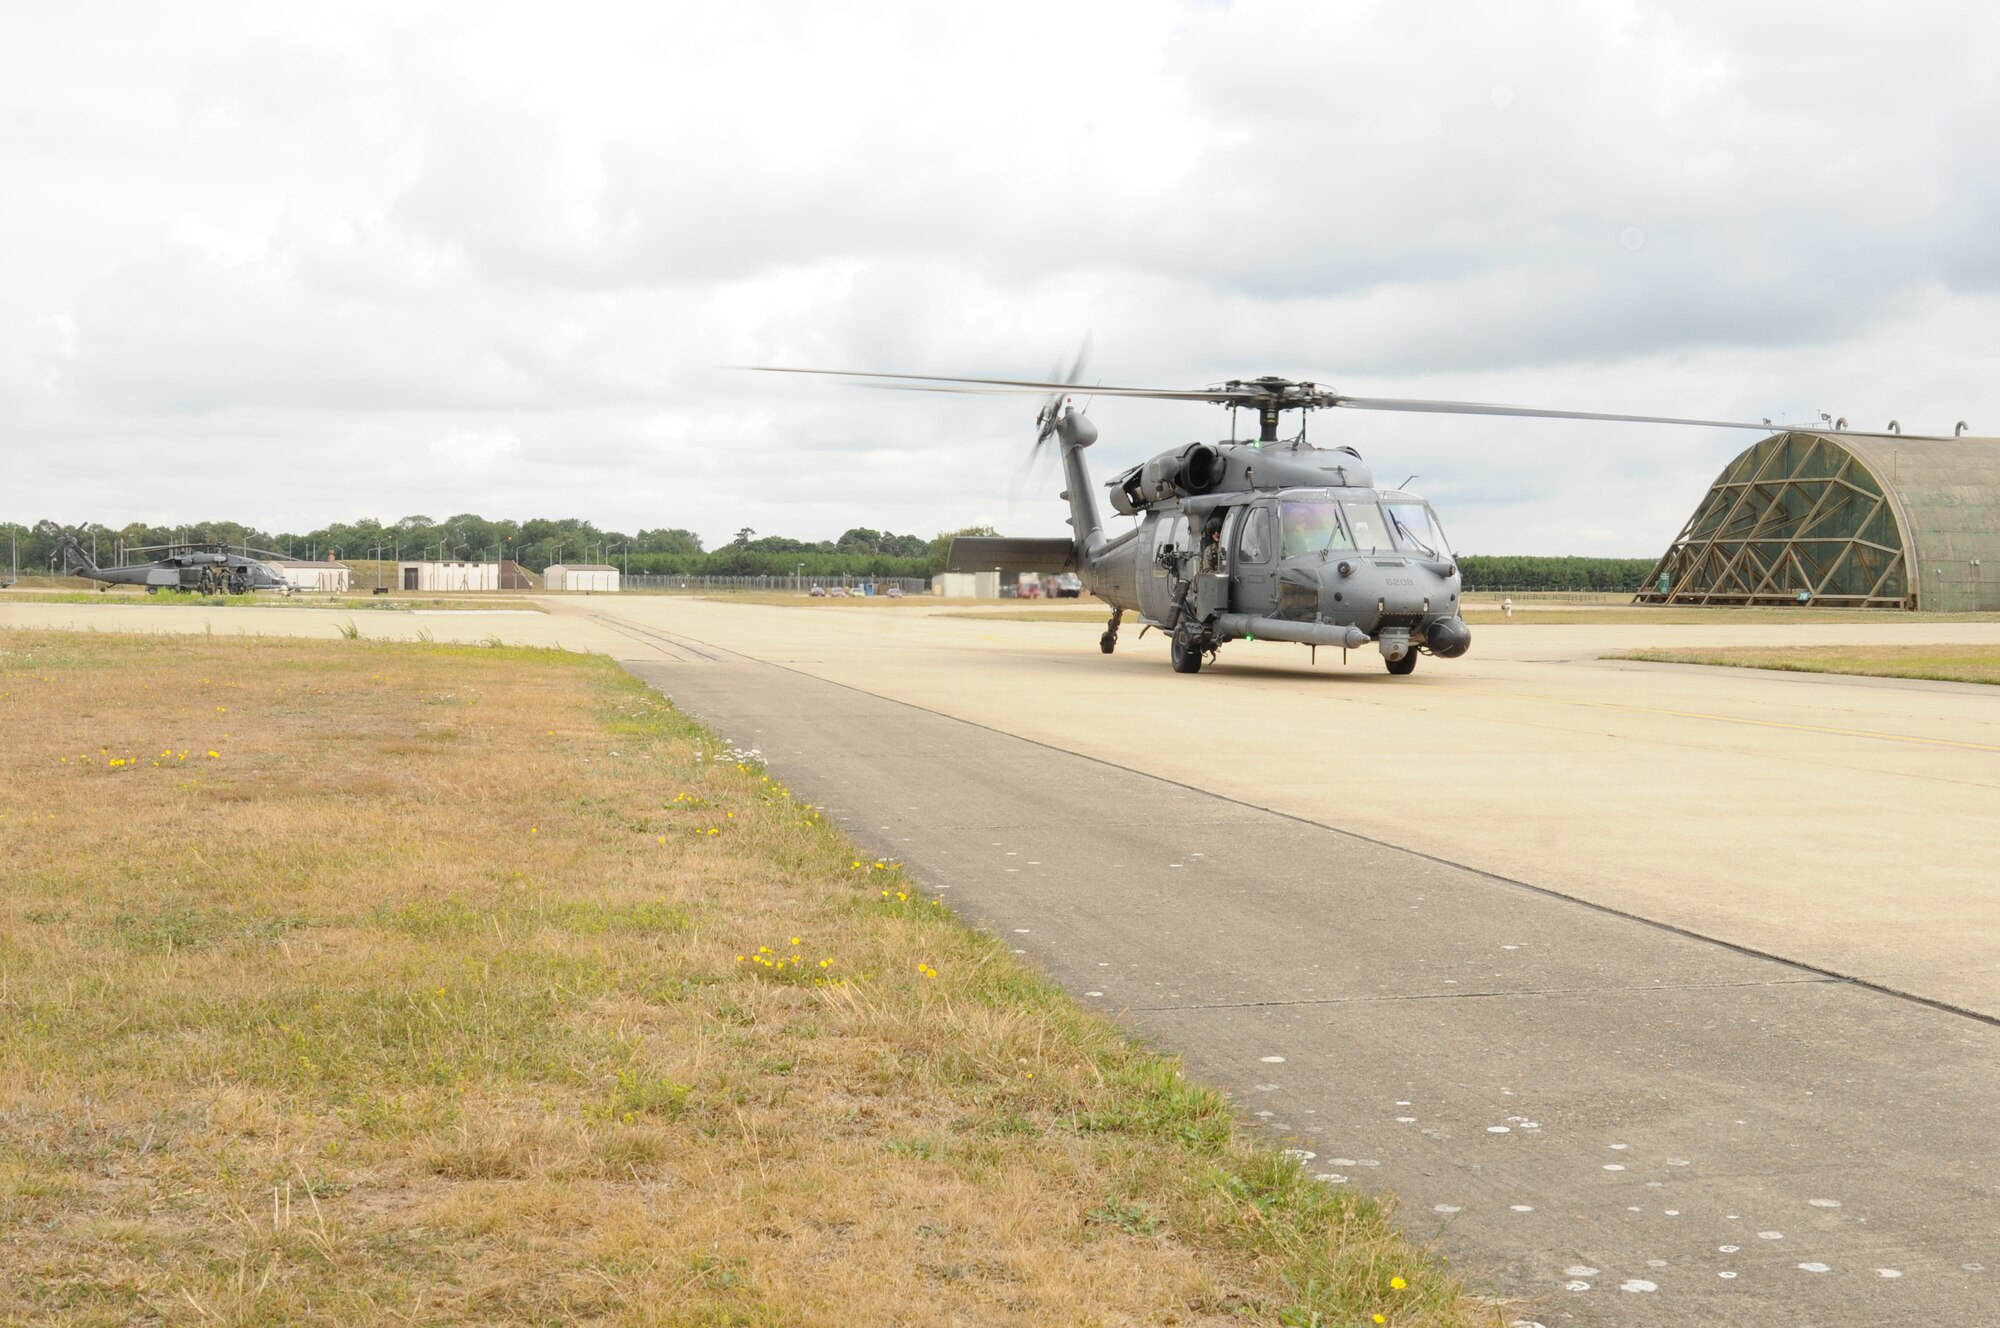 An HH-60G helicopter taxis down the runway at RAF Lakenheath, England, July 29, prior to taking off for the Allied Strike exercise in Germany. Allied Strike is a large-scale exercise providing training in tactical air control and close air support. (U.S. Air Force photo/Senior Airman David Dobrydney)